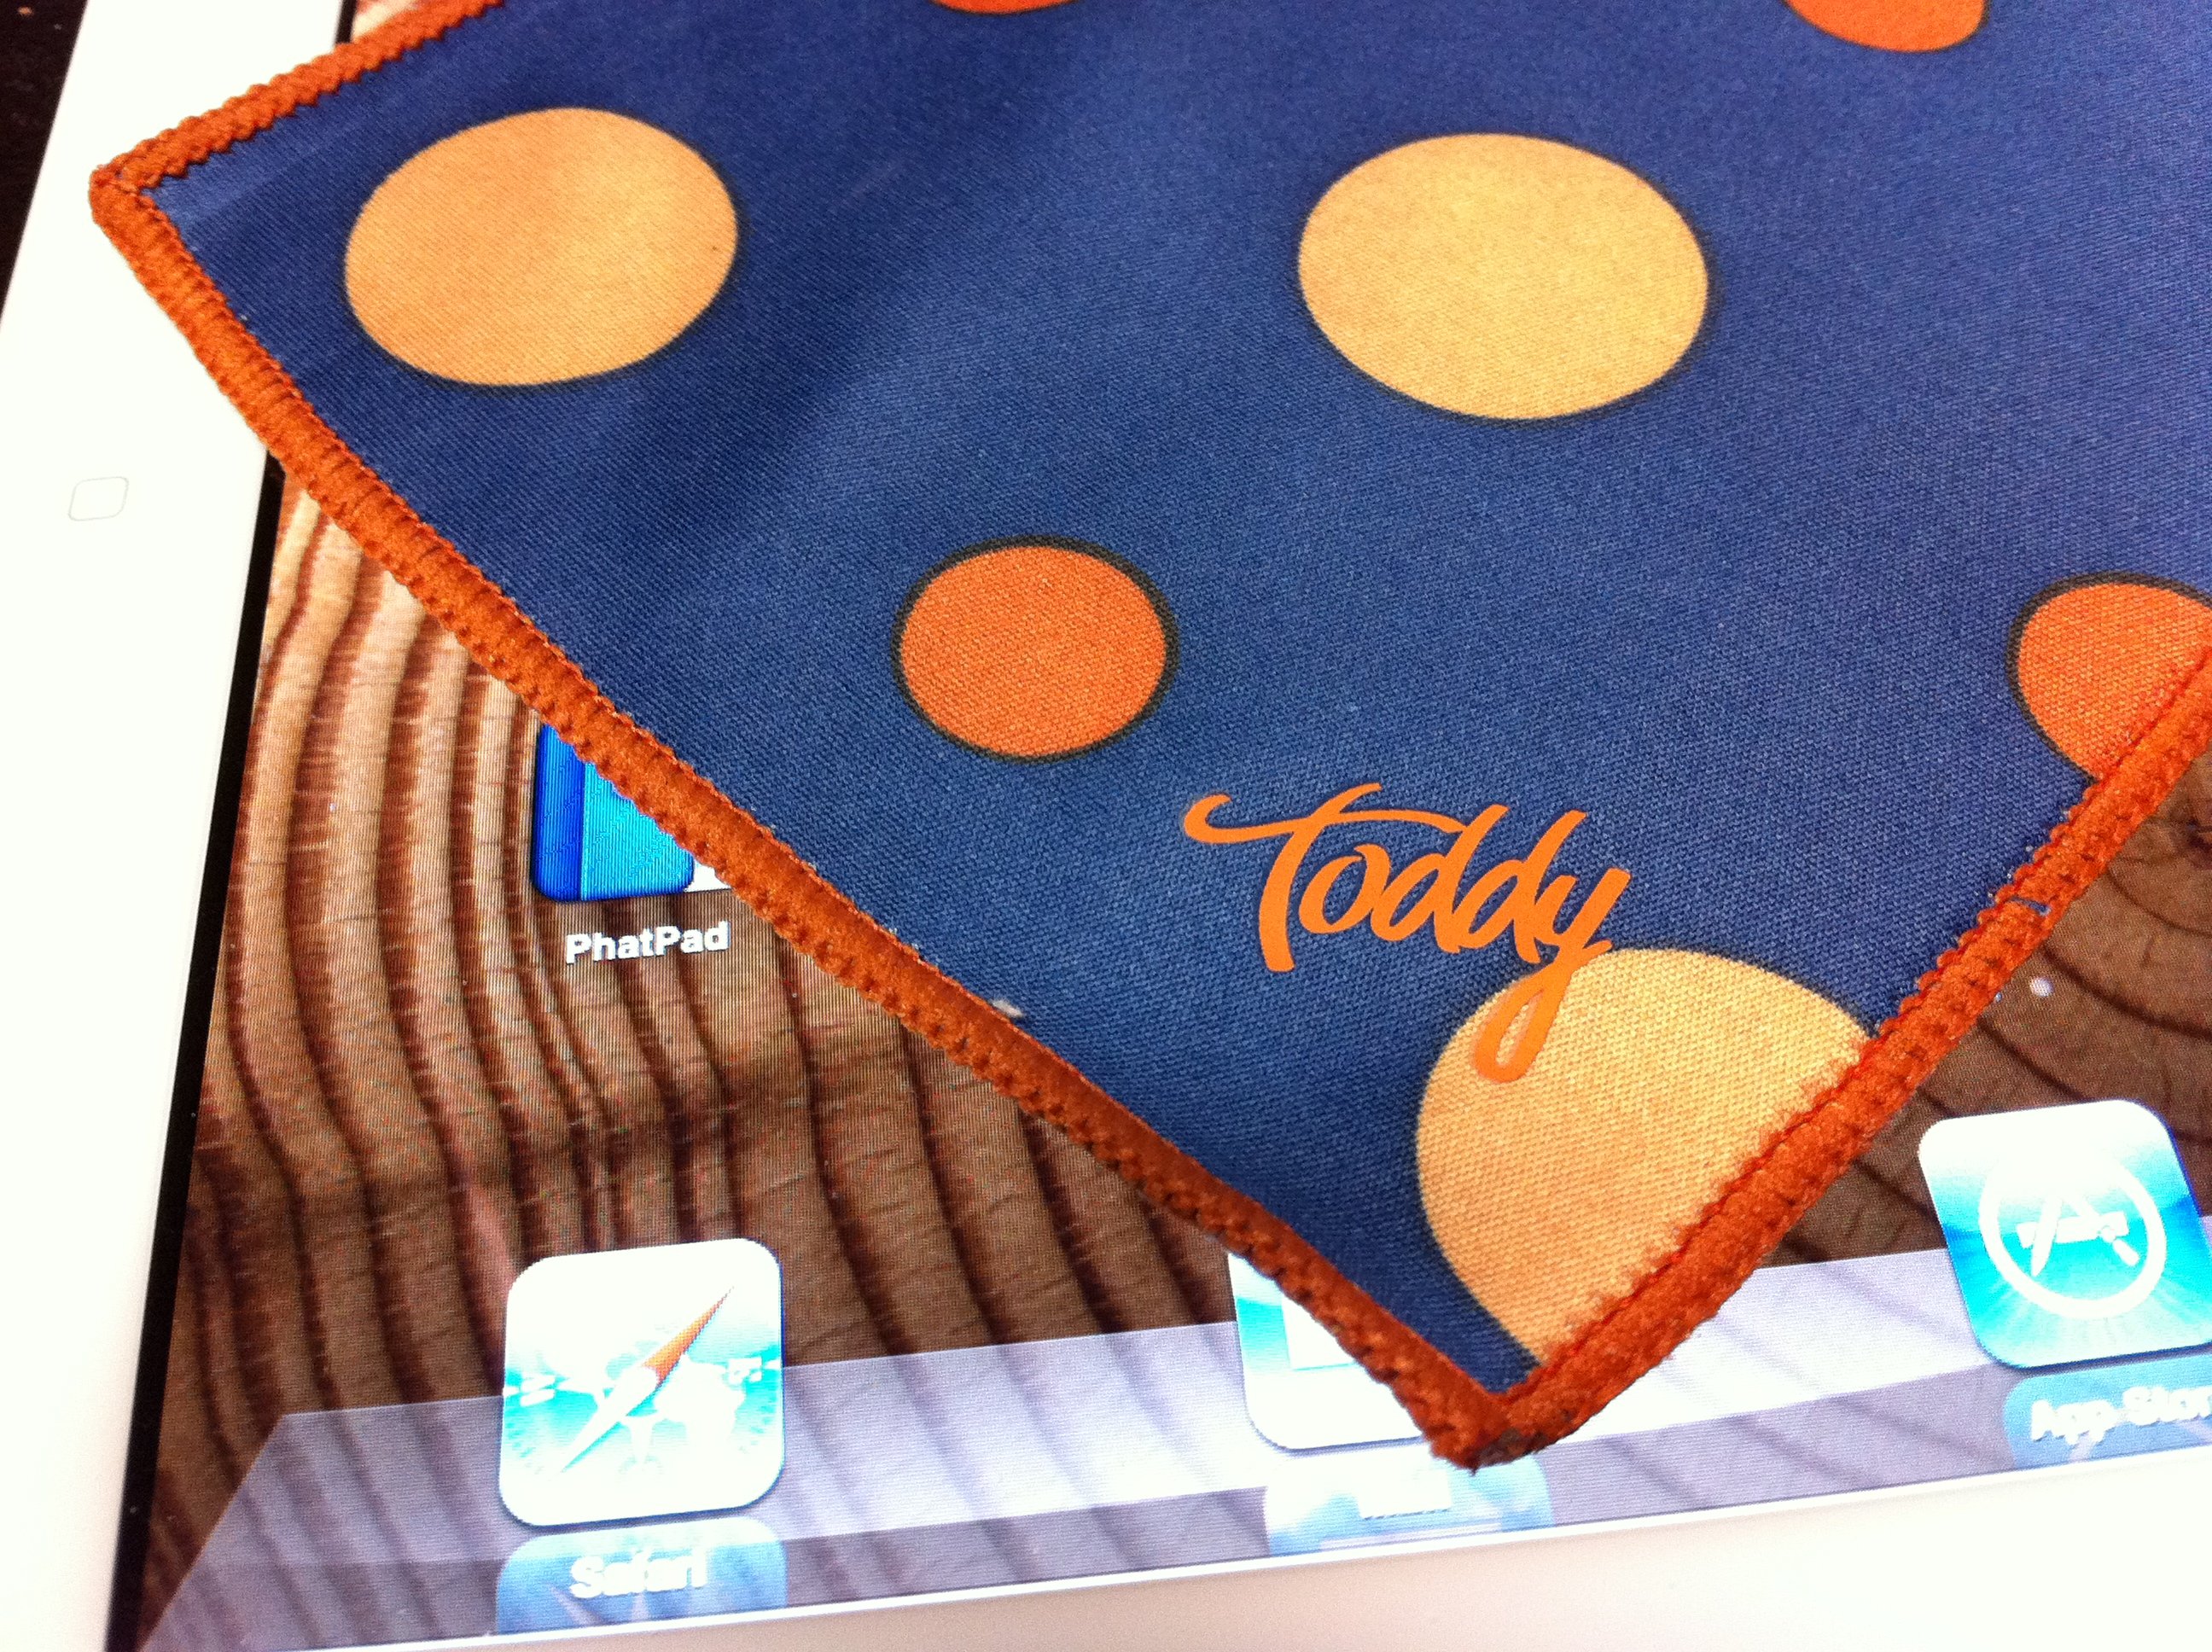 The Toddy microfiber cleaning cloth